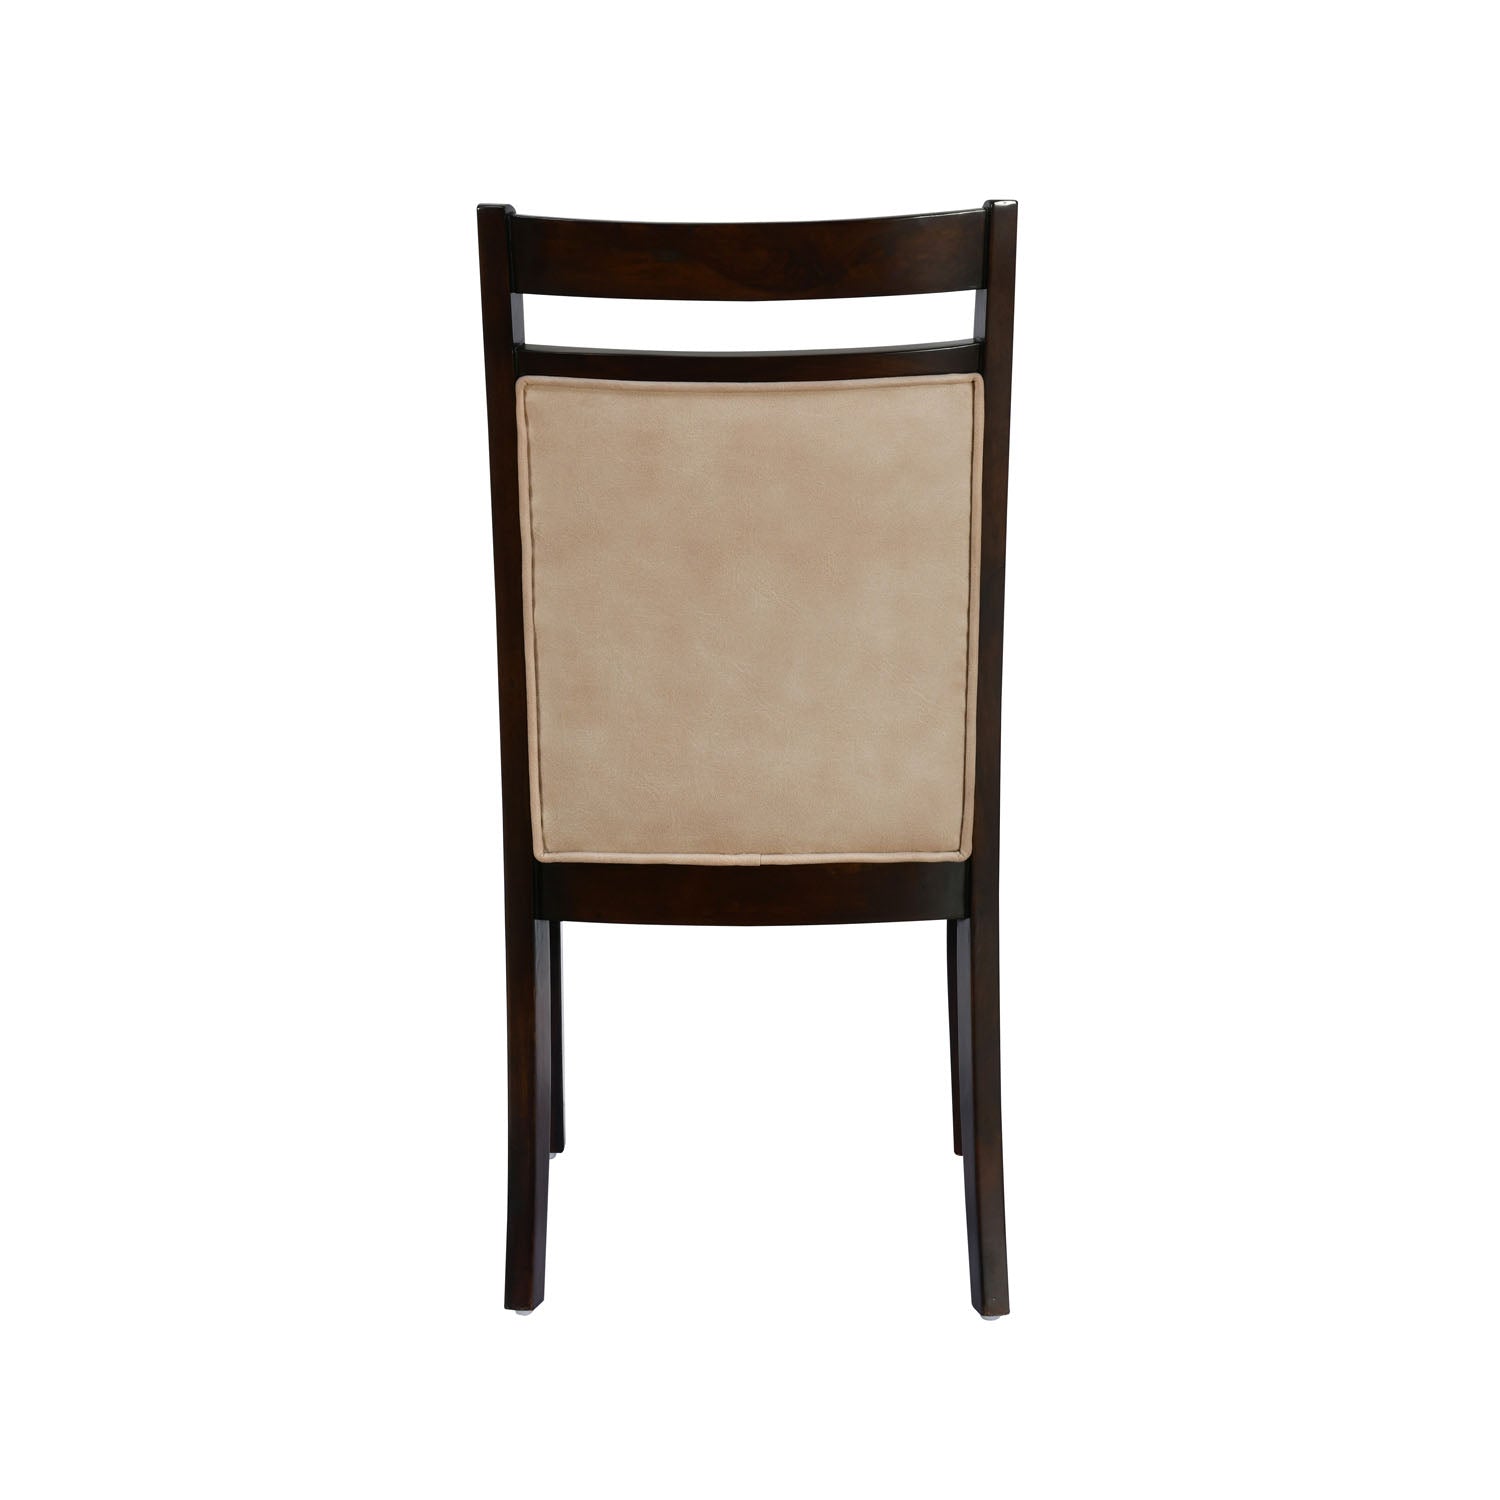 Pedro Solid Wood Dining Chair in Beige Finish